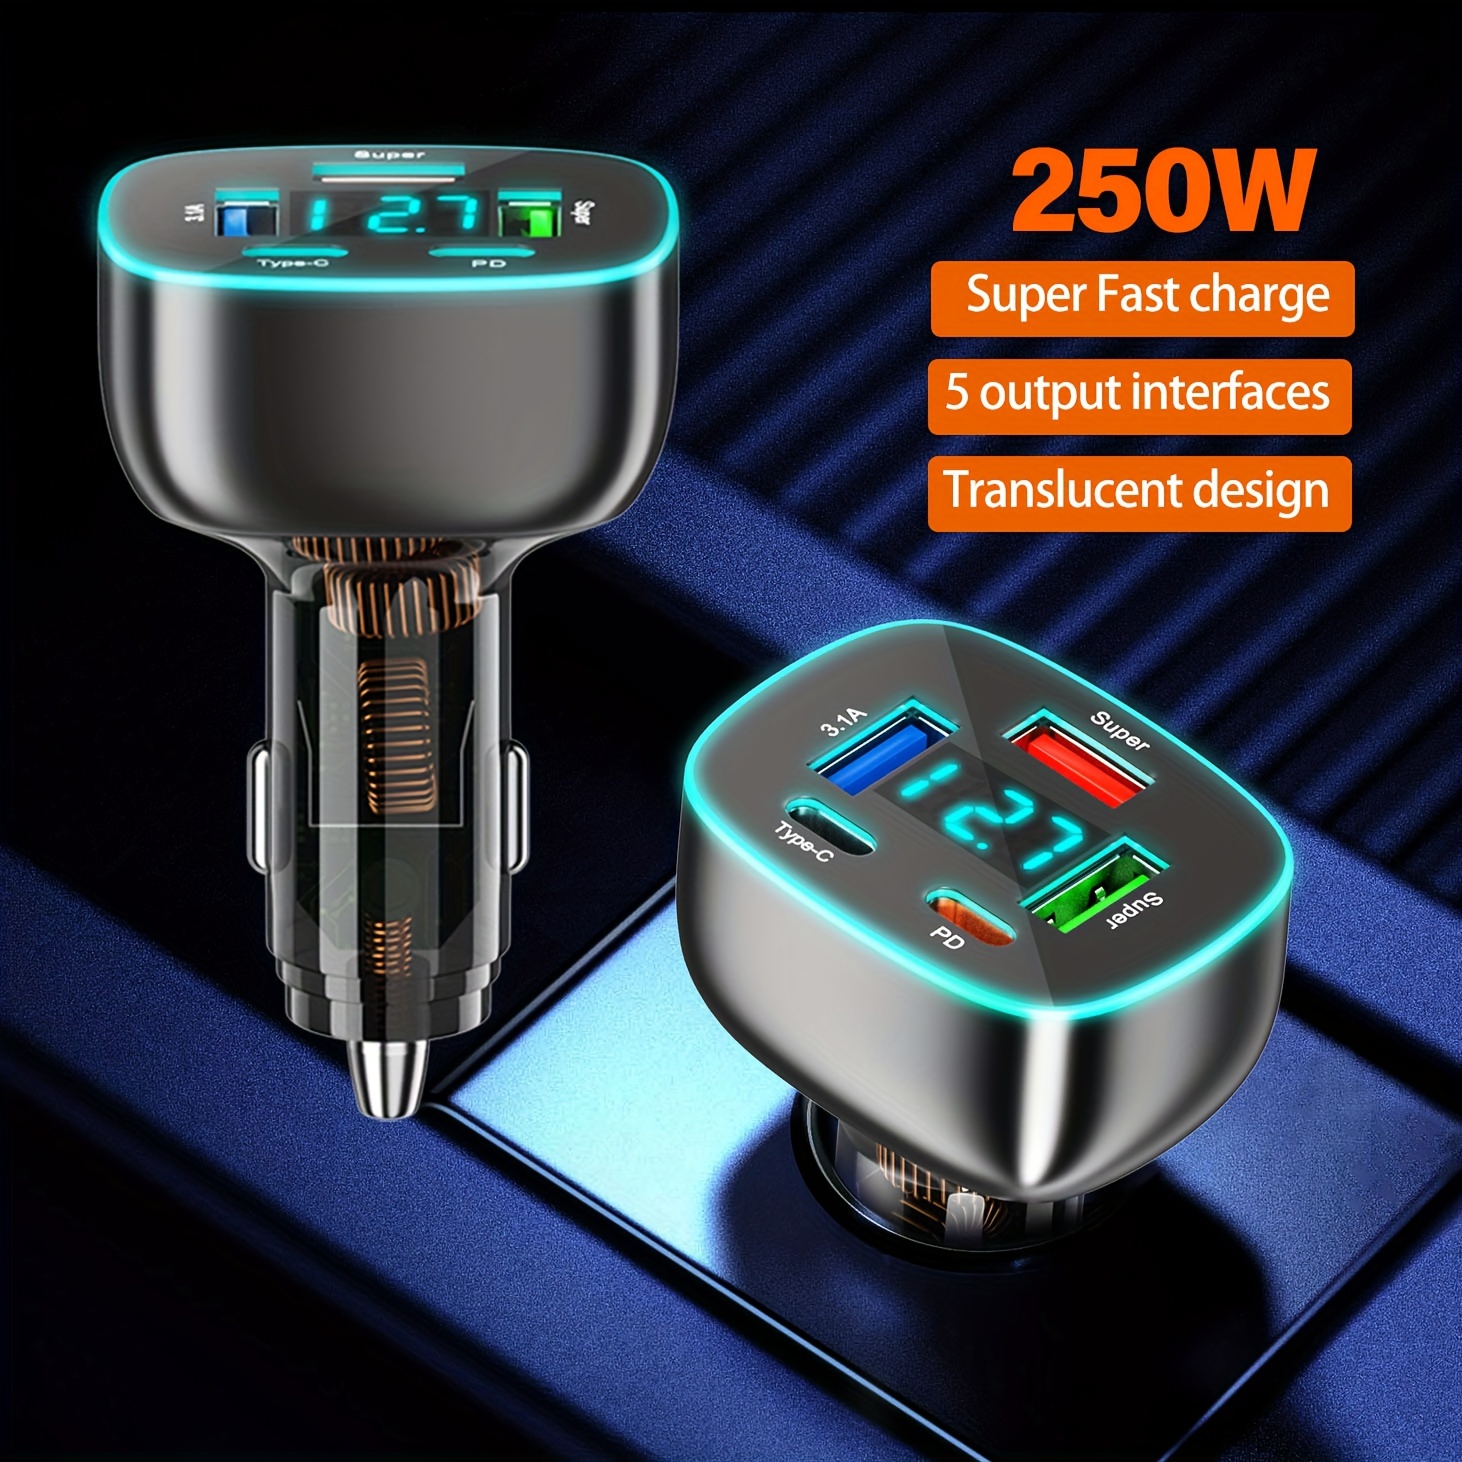 

250w Super Fast With 5a Pd & Usb - Universal 12v-32v Adapter For Cars And Trucks, Translucent Design With Real-time Voltage Display